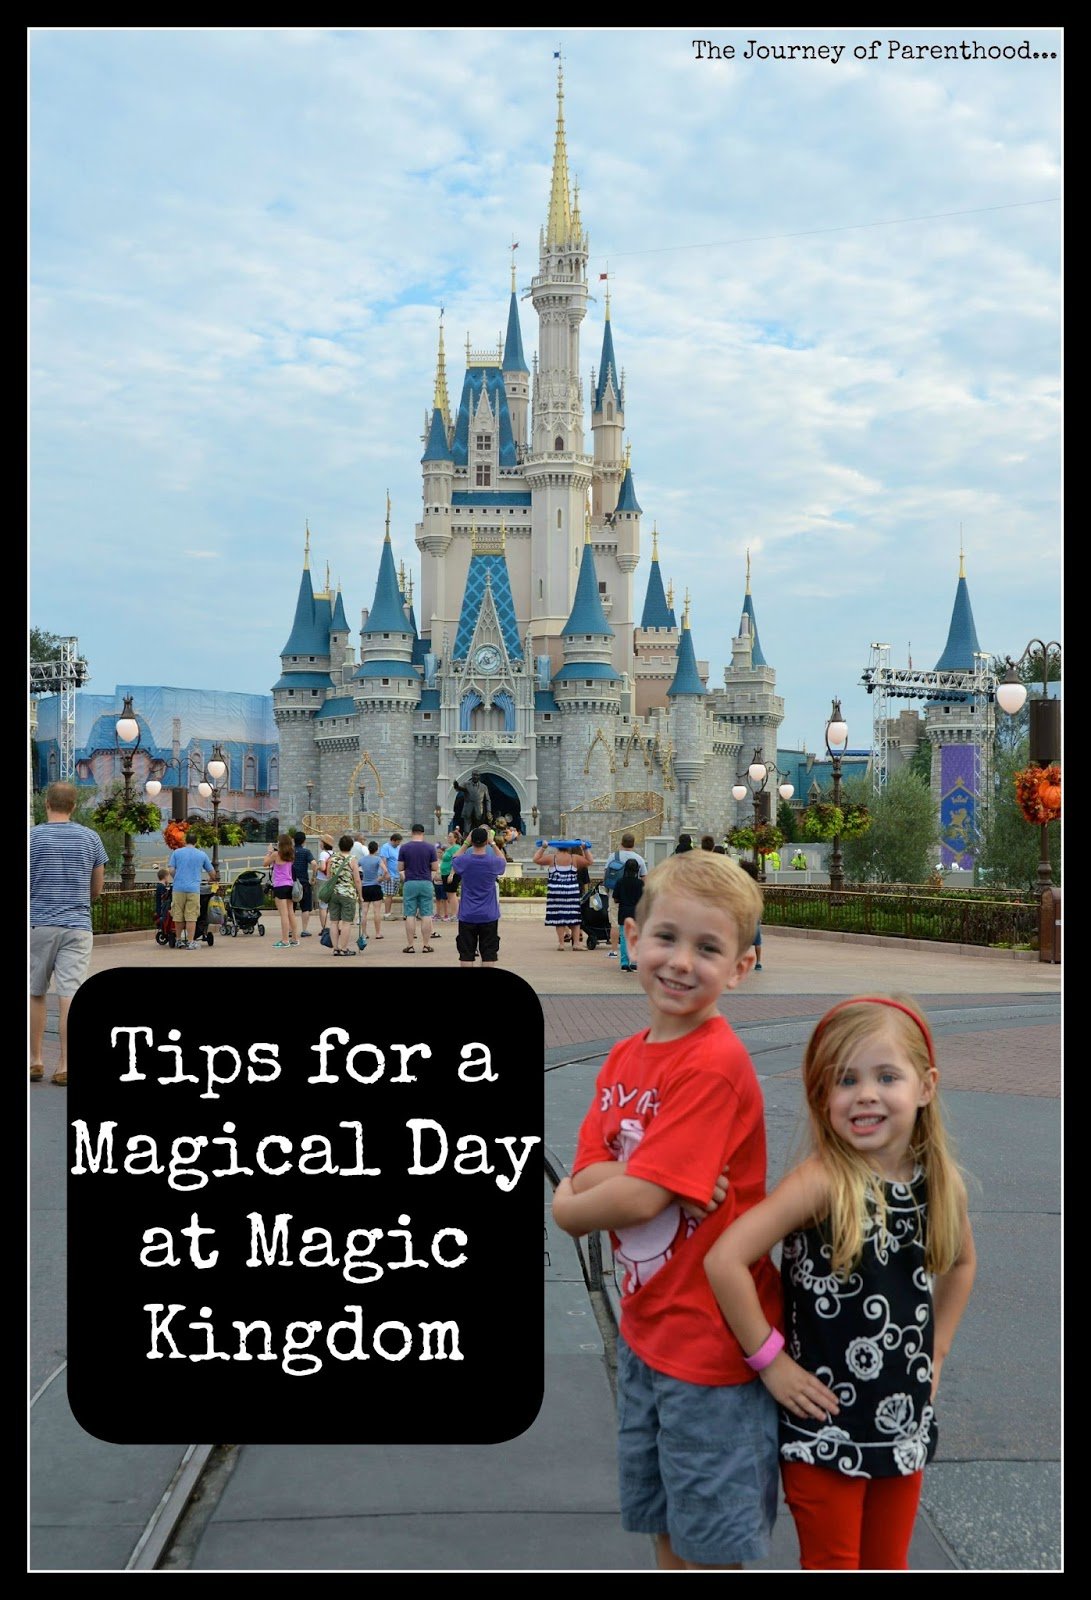 Tips for a Magical Day at Magic Kingdom